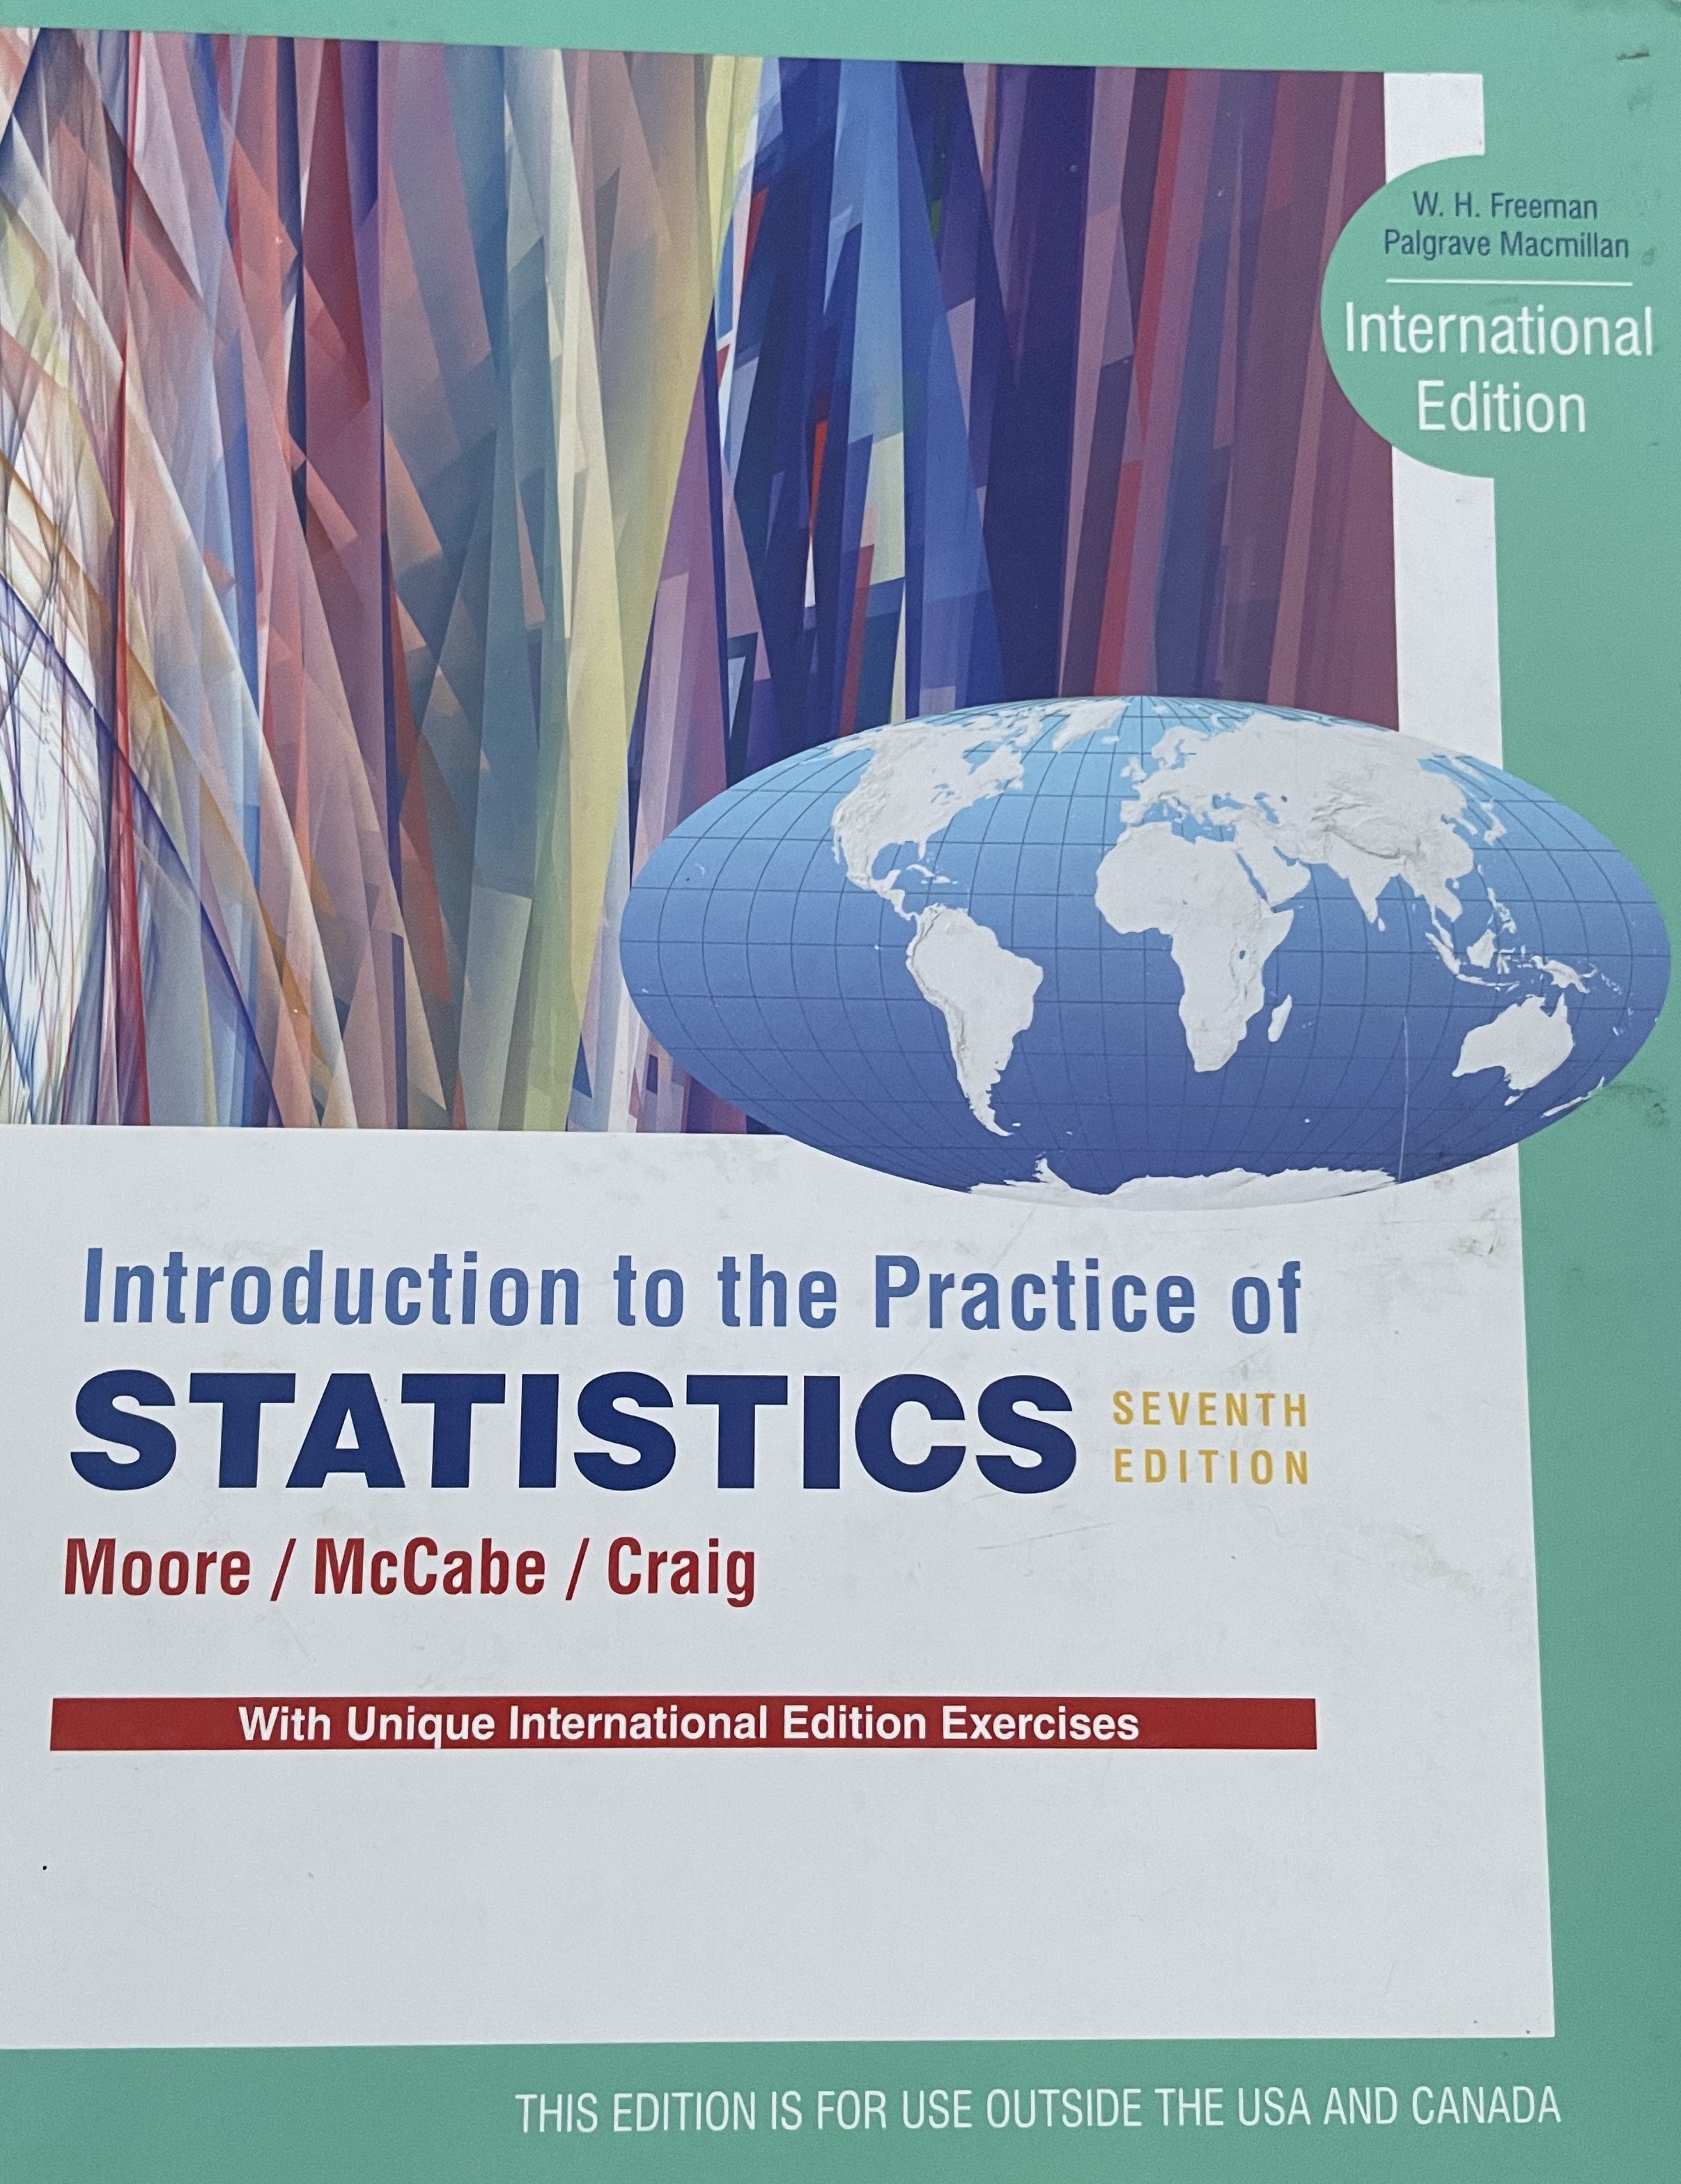 Introduction to the Practice of Statistics; David S. Moore,George P. McCabe,Bruce A. Craig; 2012